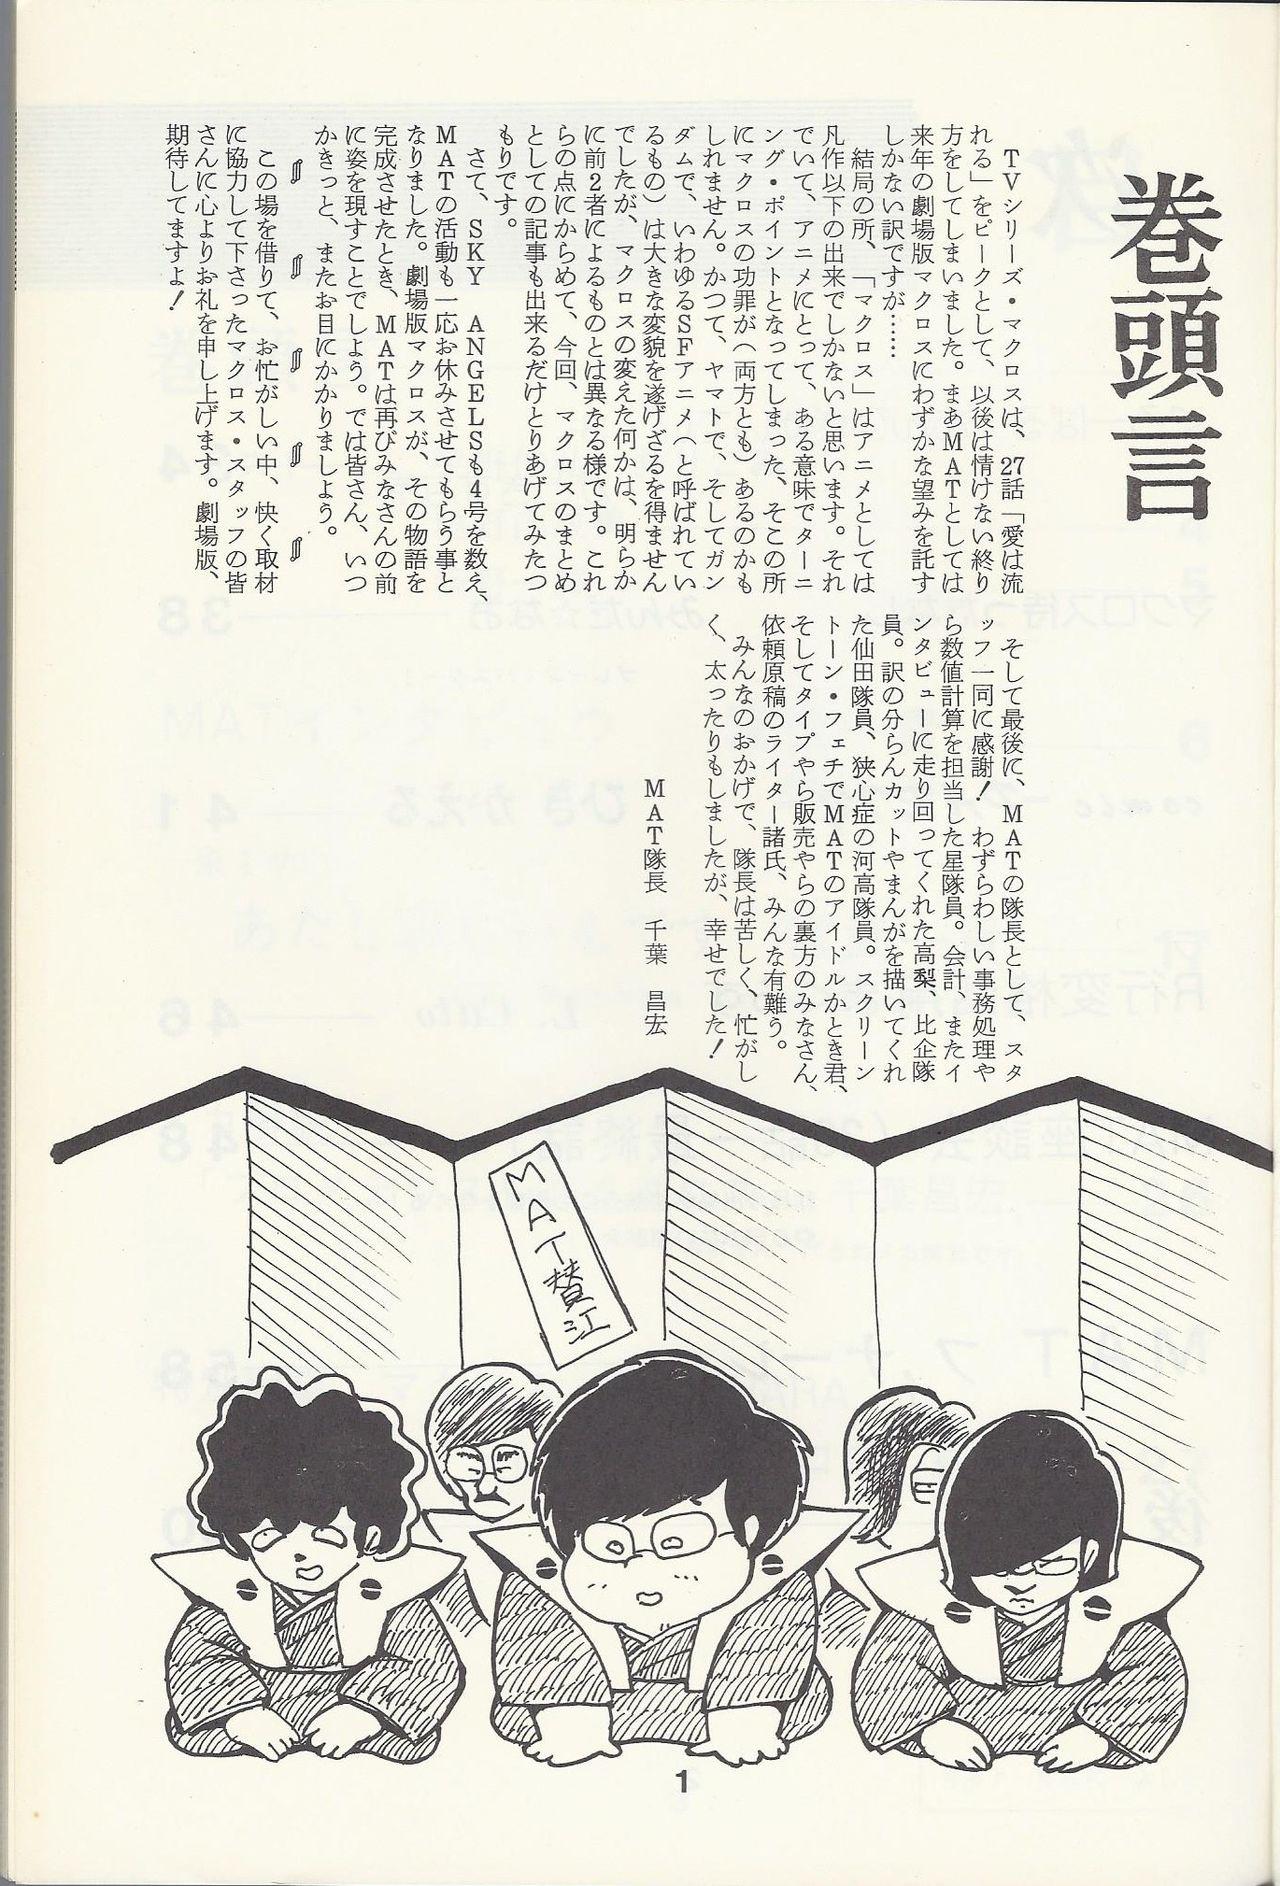 Peluda Macross Attack Team - Sky Angels IV: Don't Say Goodbye - The super dimension fortress macross For - Page 3